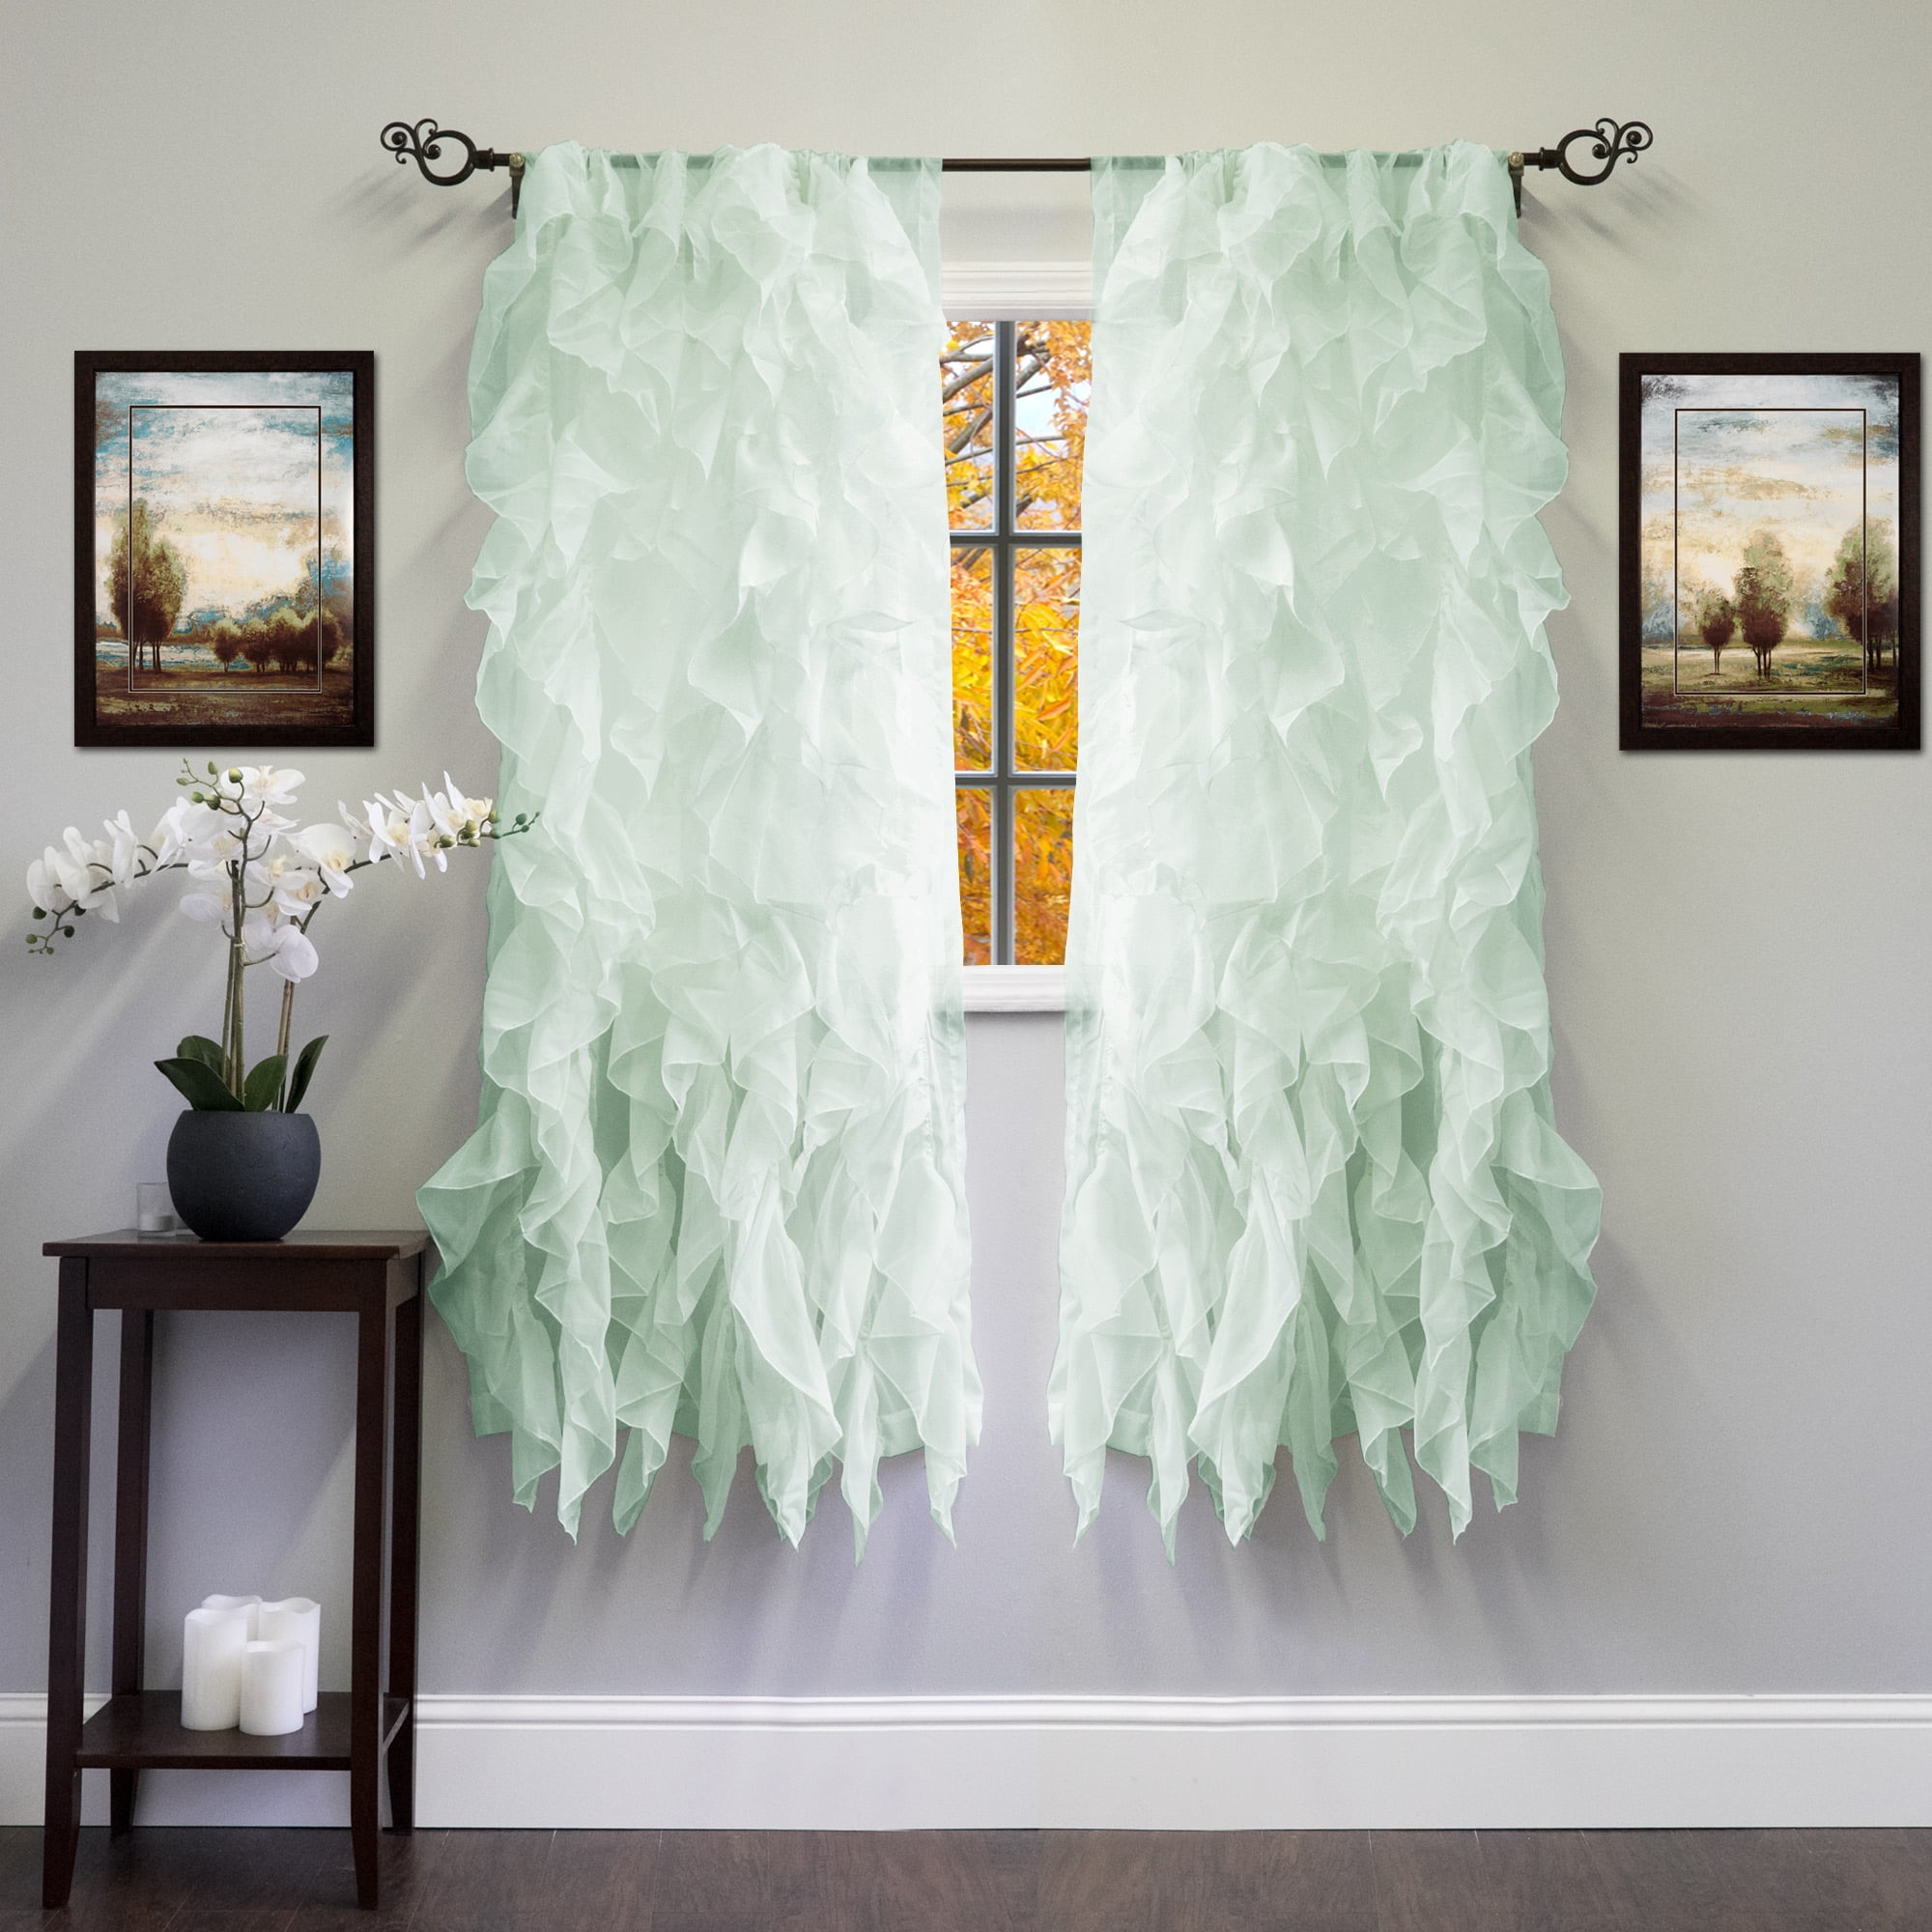 Chic Sheer Voile Vertical Ruffled Tier Window Curtain Single Panel 50" x 63" 